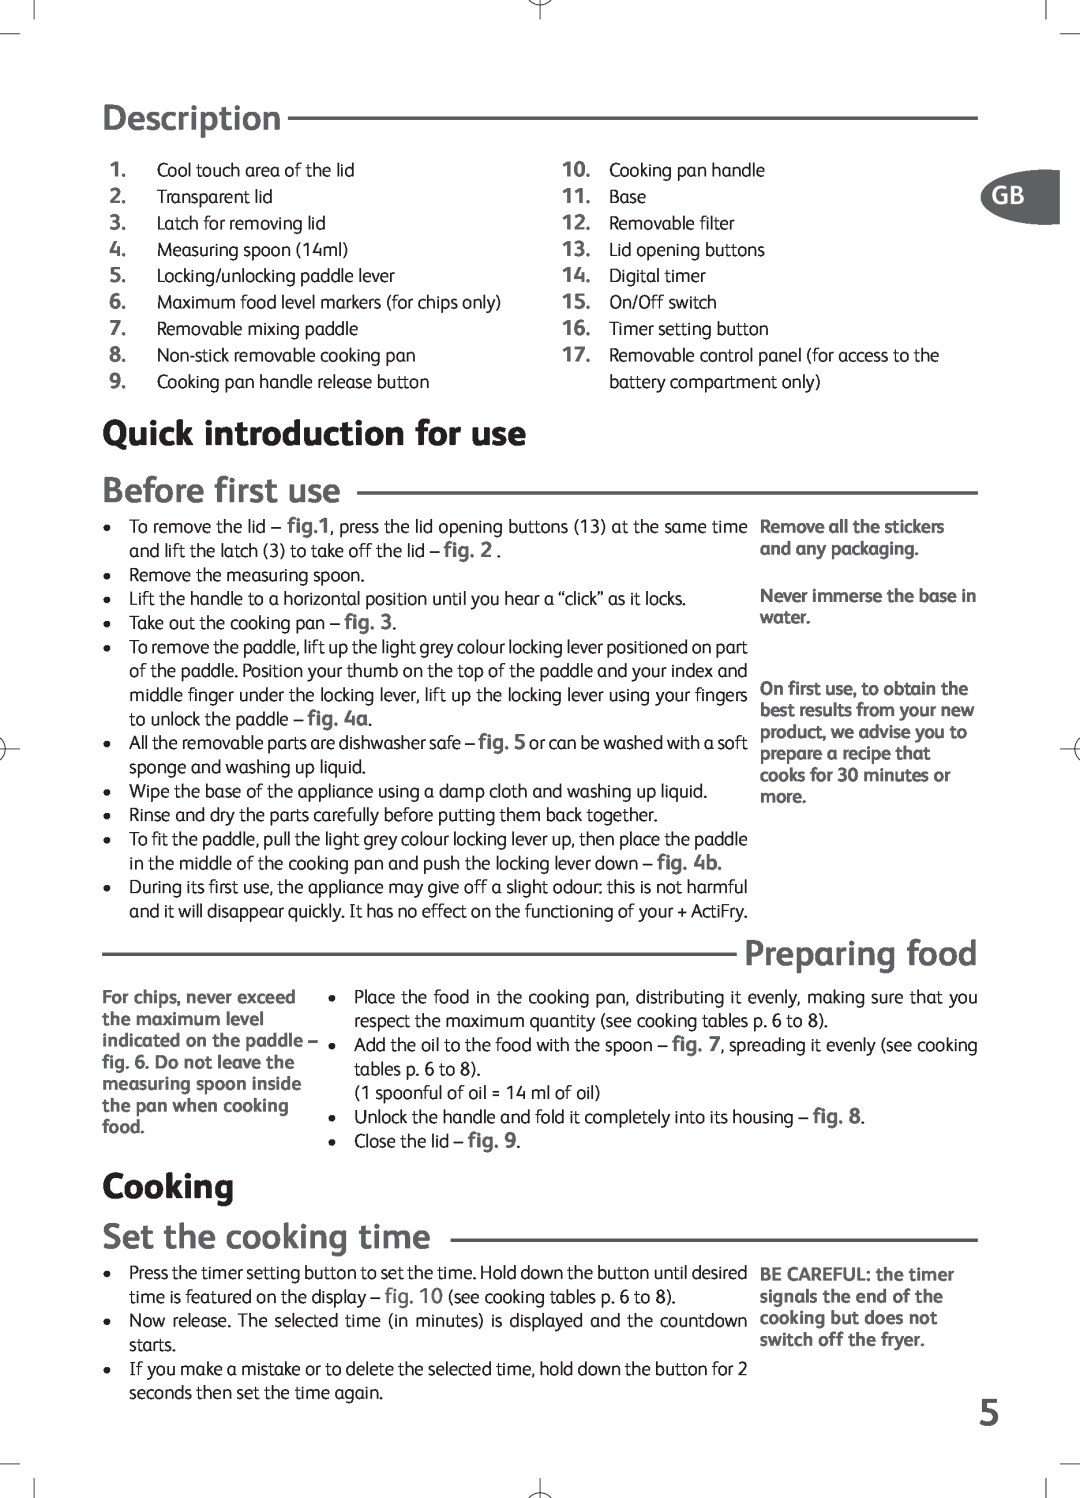 Tefal FZ700236 Description, Quick introduction for use, Before first use, Preparing food, Cooking, Set the cooking time 